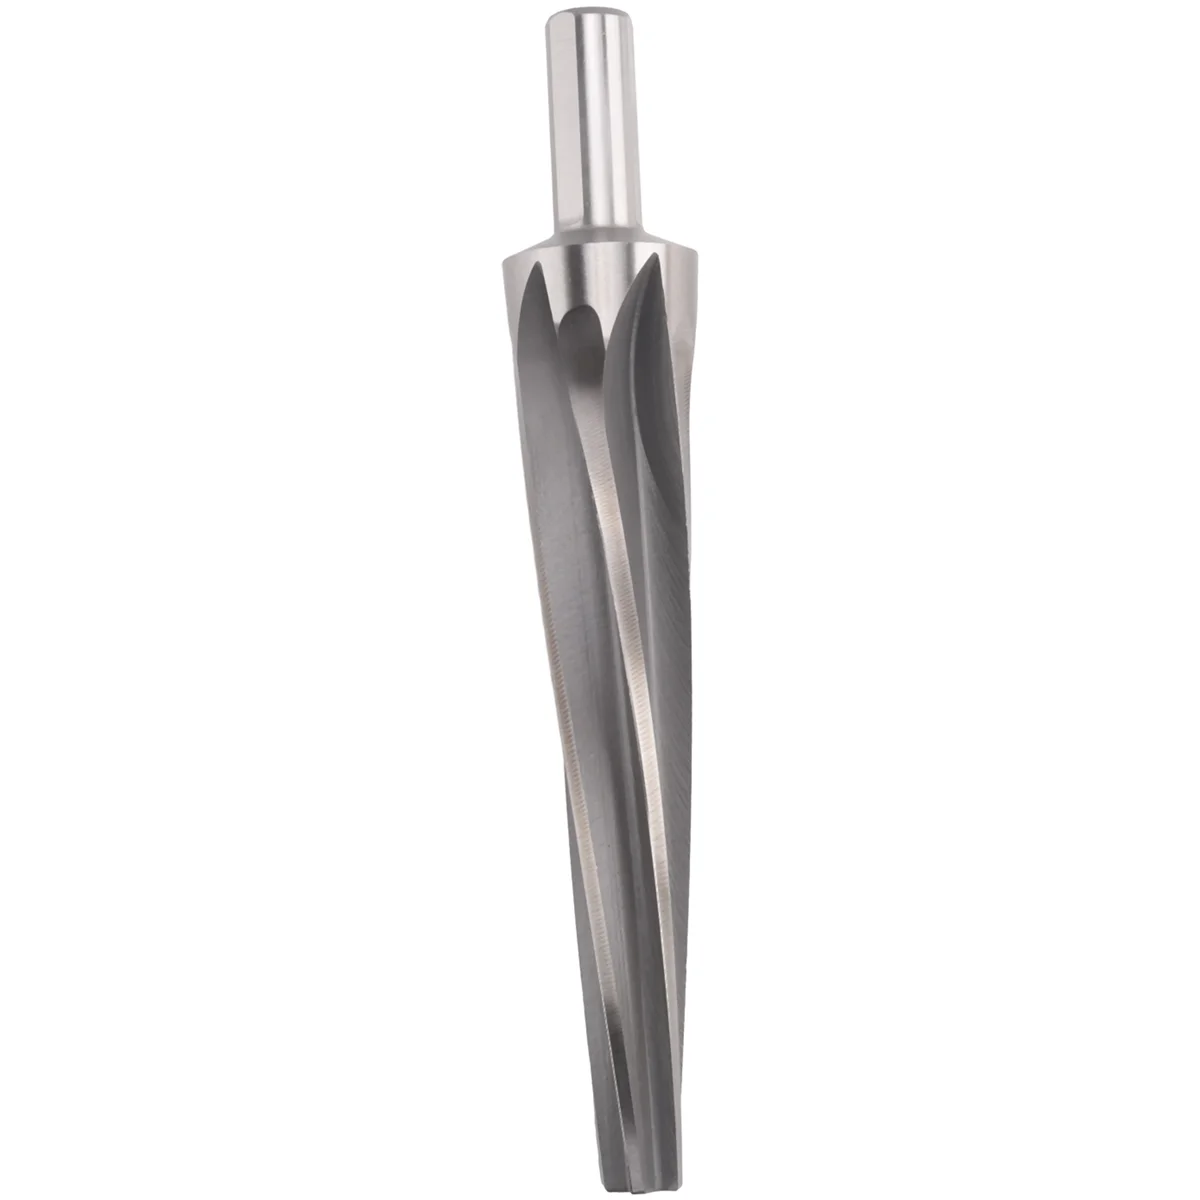 

7 Degree Ball Joint Tapered Reamer, 1-1/2 Inches Per Foot Tapered Ball Joint Reamer, Reamer Bit Universal Reamer Tool